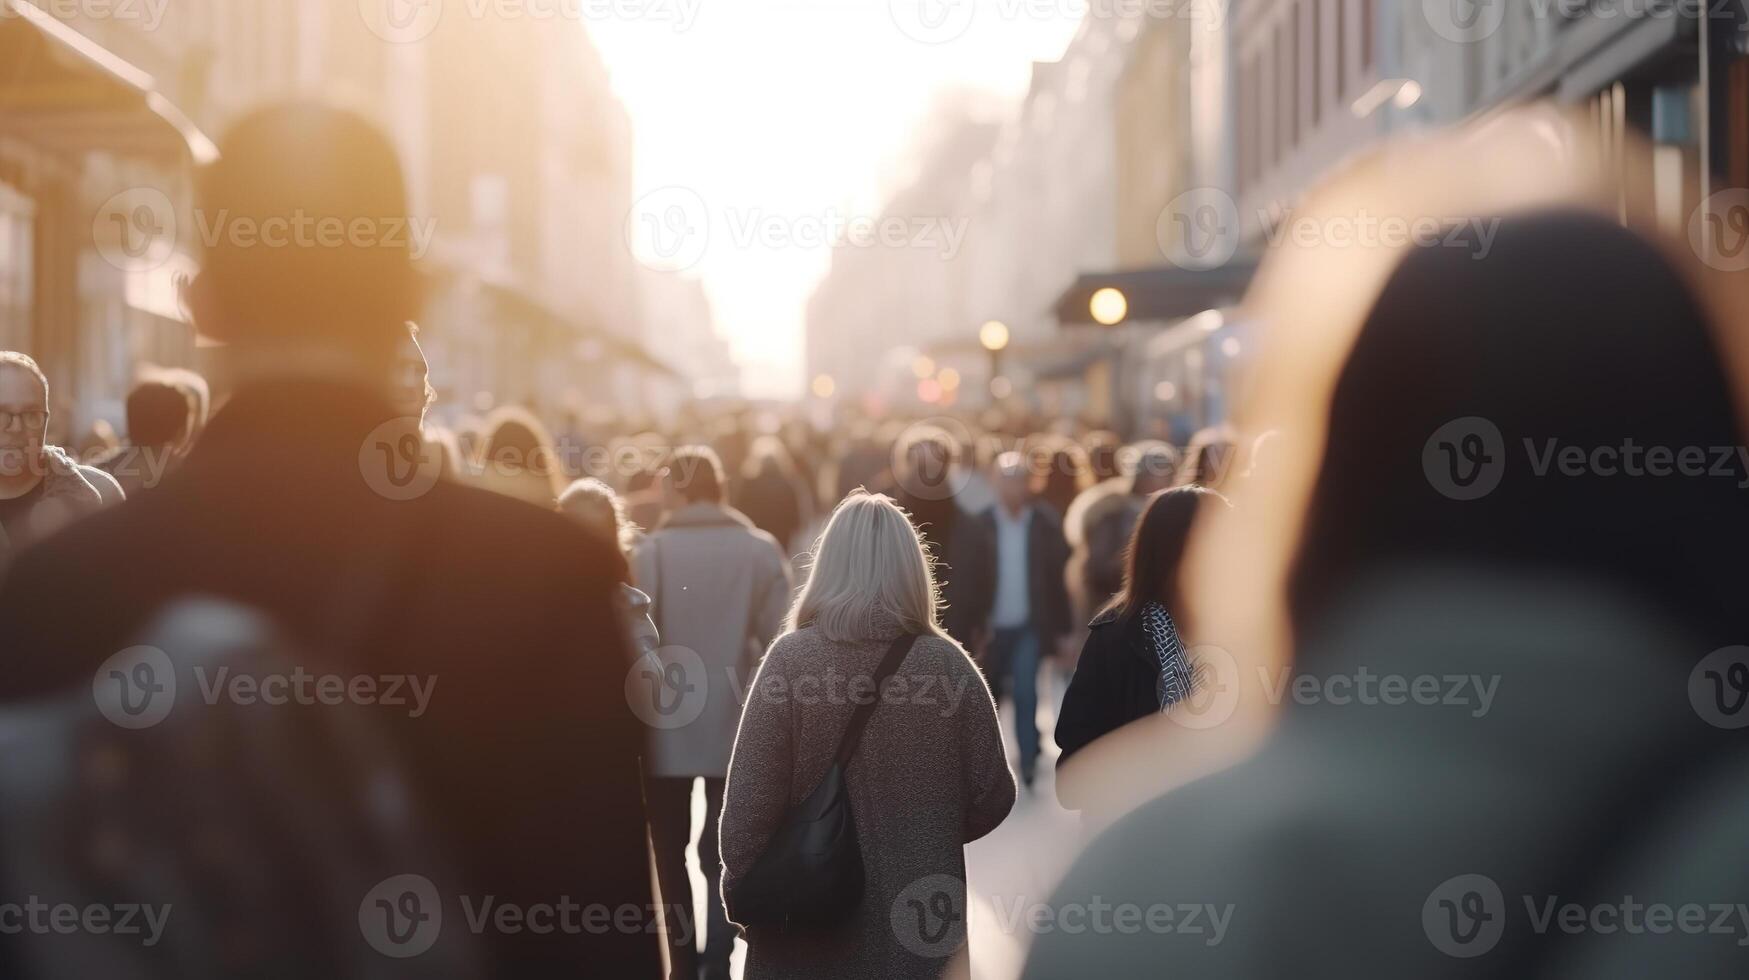 City Life in Motion. A Bokeh Blur of People Walking through the Busy Streets. photo